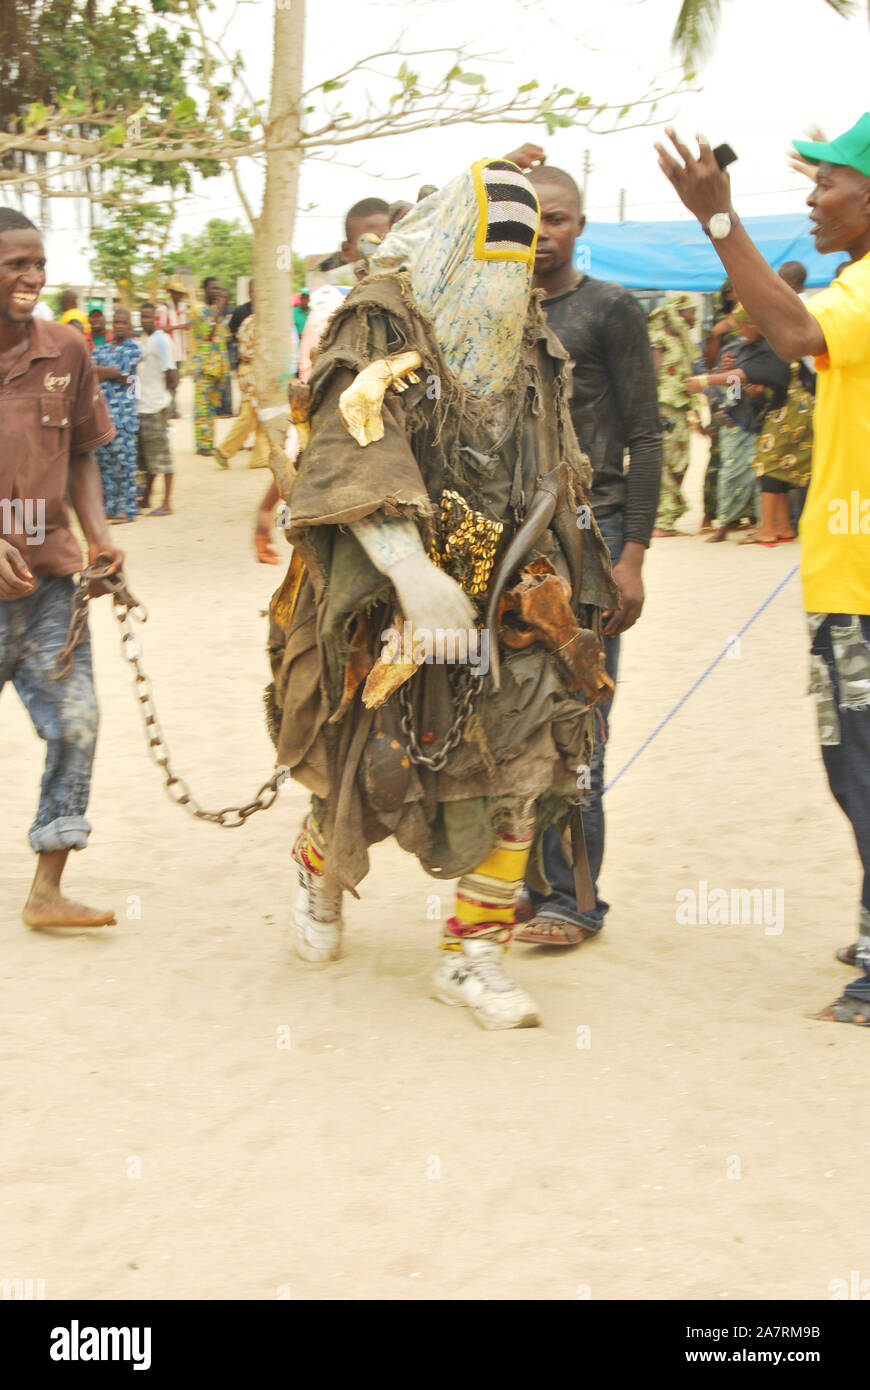 A Masquerade arriving at the venue of the Annual Black Heritage Festival, Badagry Lagos, Nigeria. Stock Photo